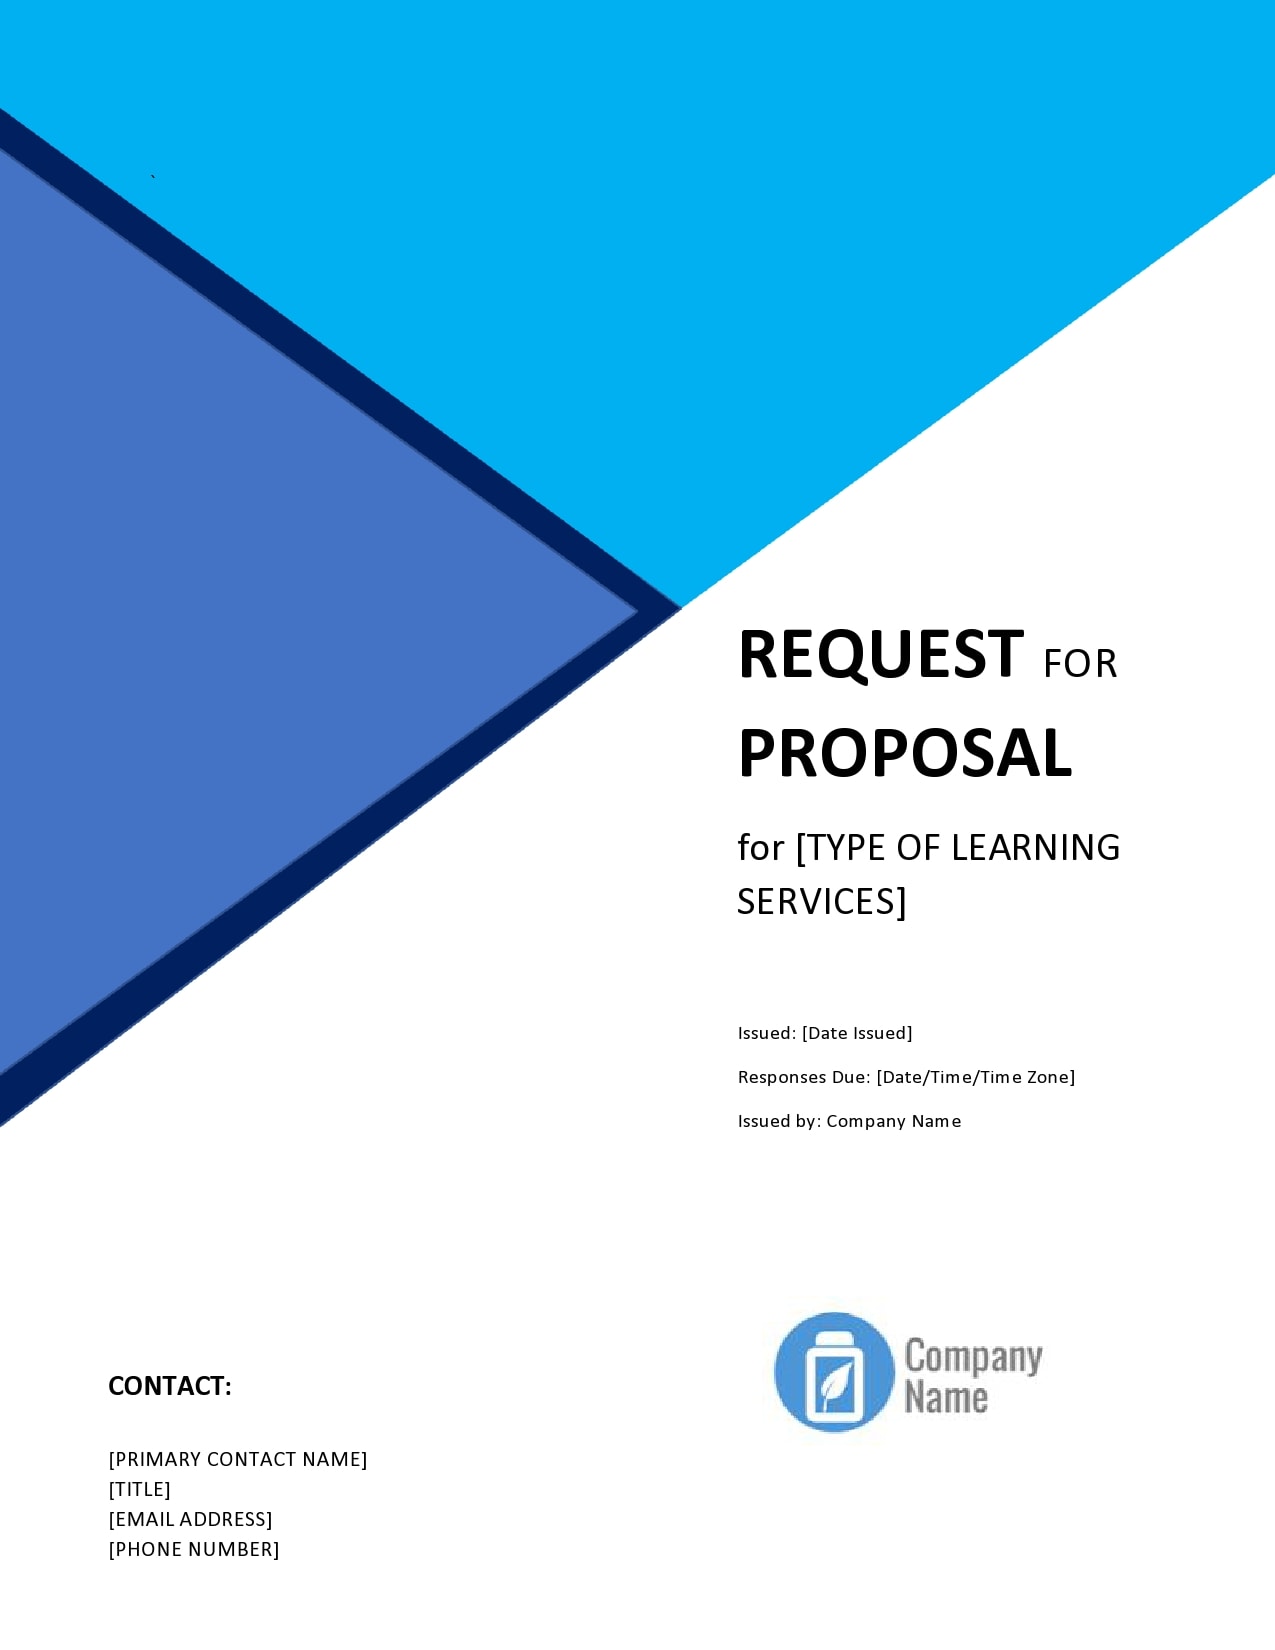 22 Best Request For Proposal Templates (RFP) - TemplateArchive For Request For Proposal Template Word